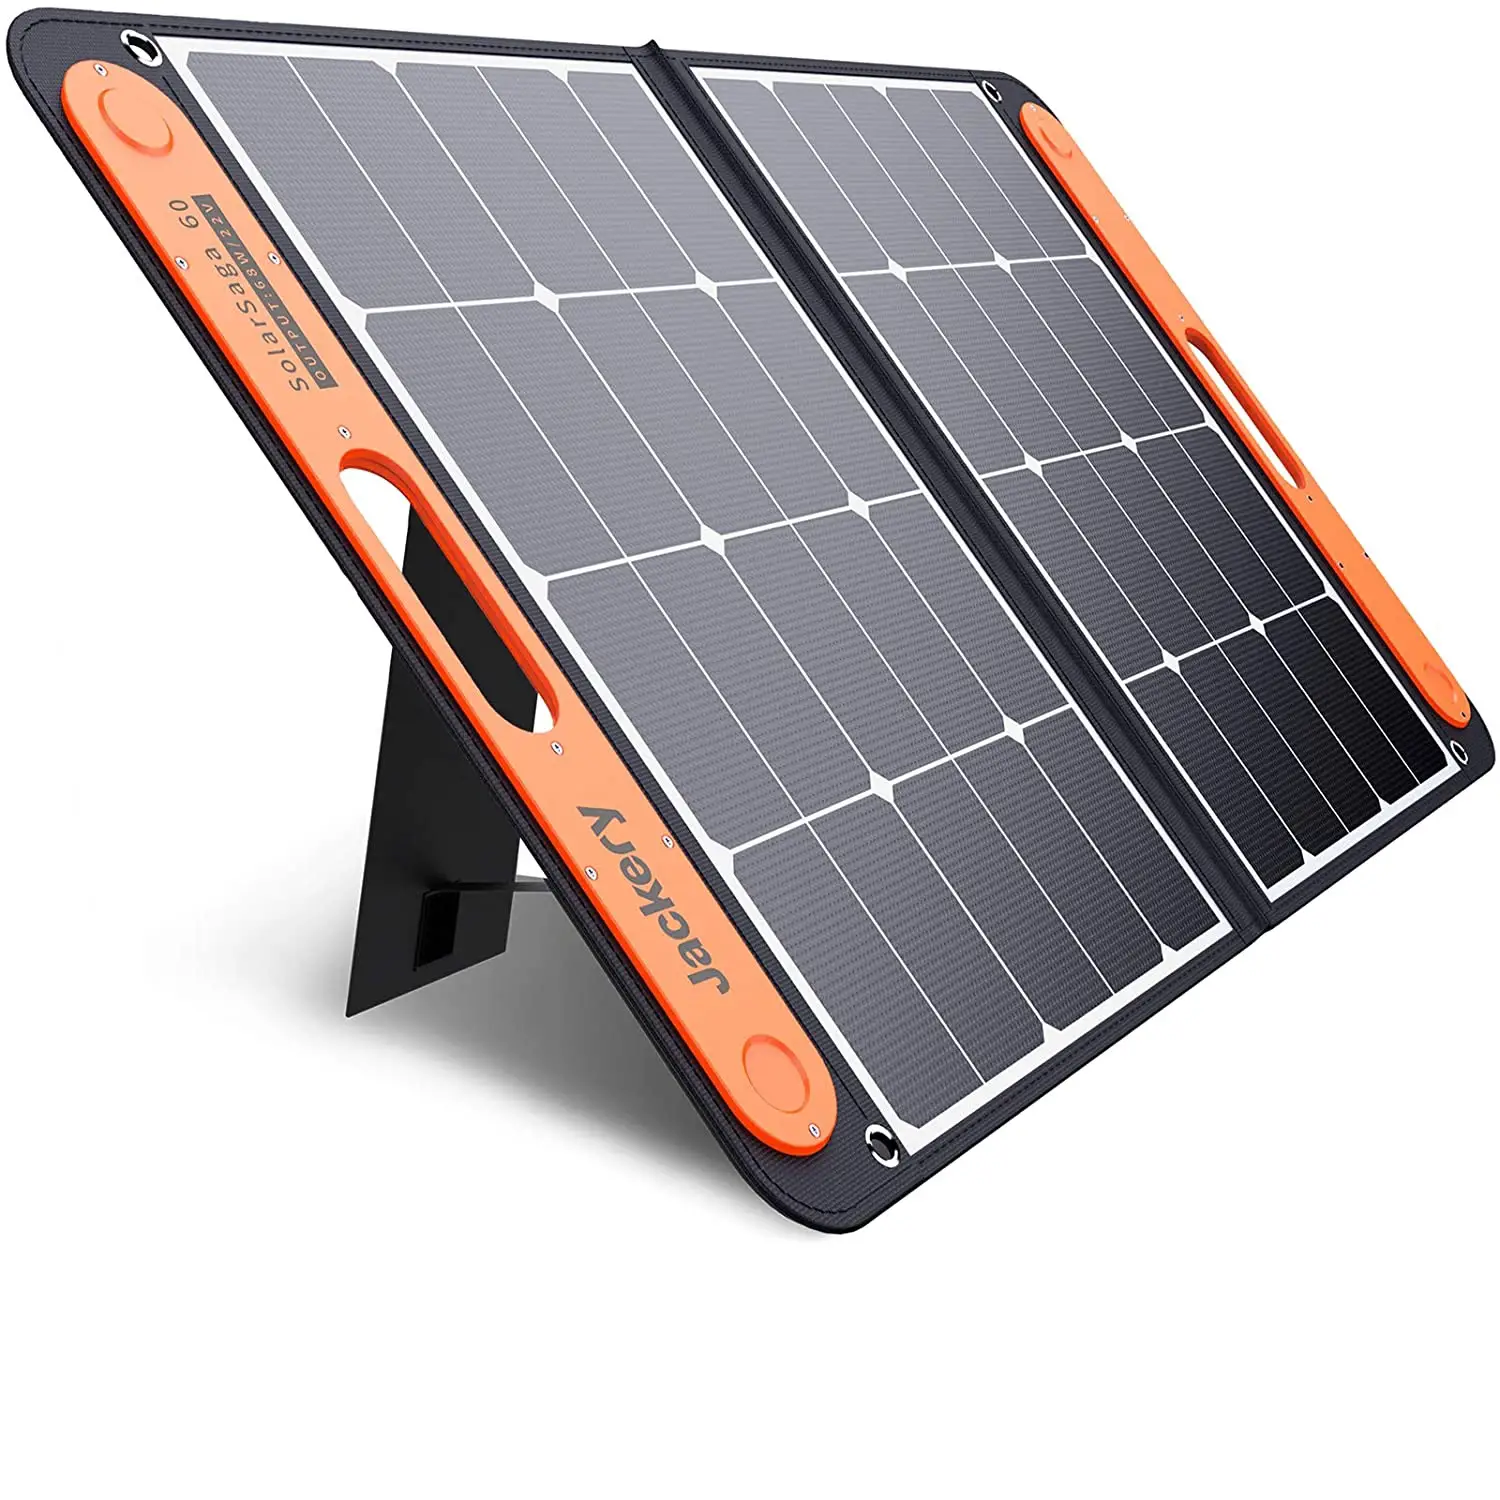 Top 5 Best Portable Solar Panels for RV [2022 Review] - RVProfy